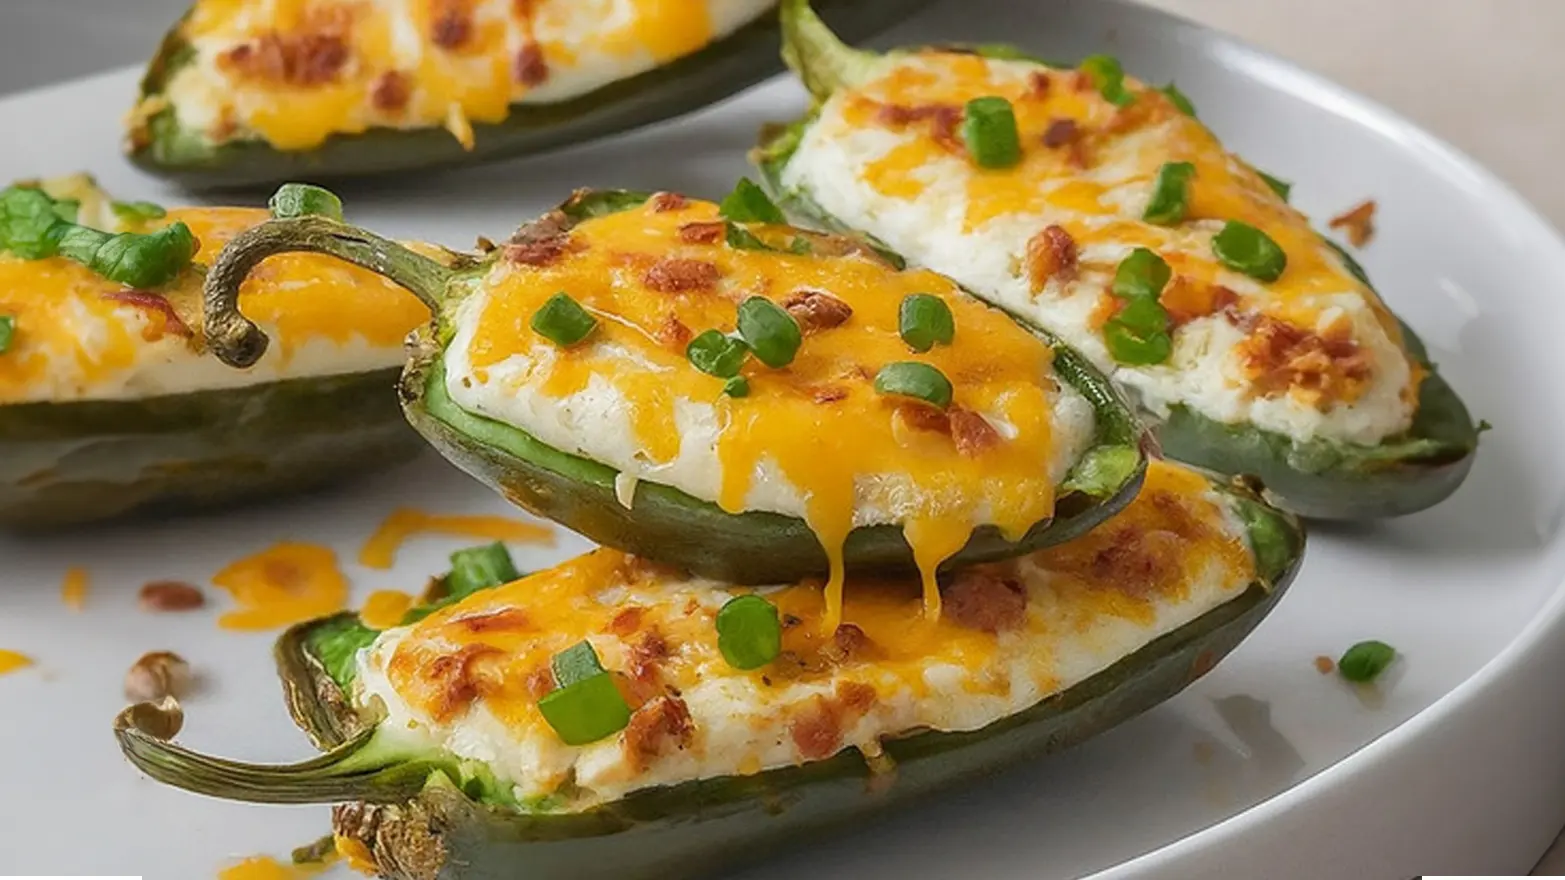 Loaded jalapeno poppers